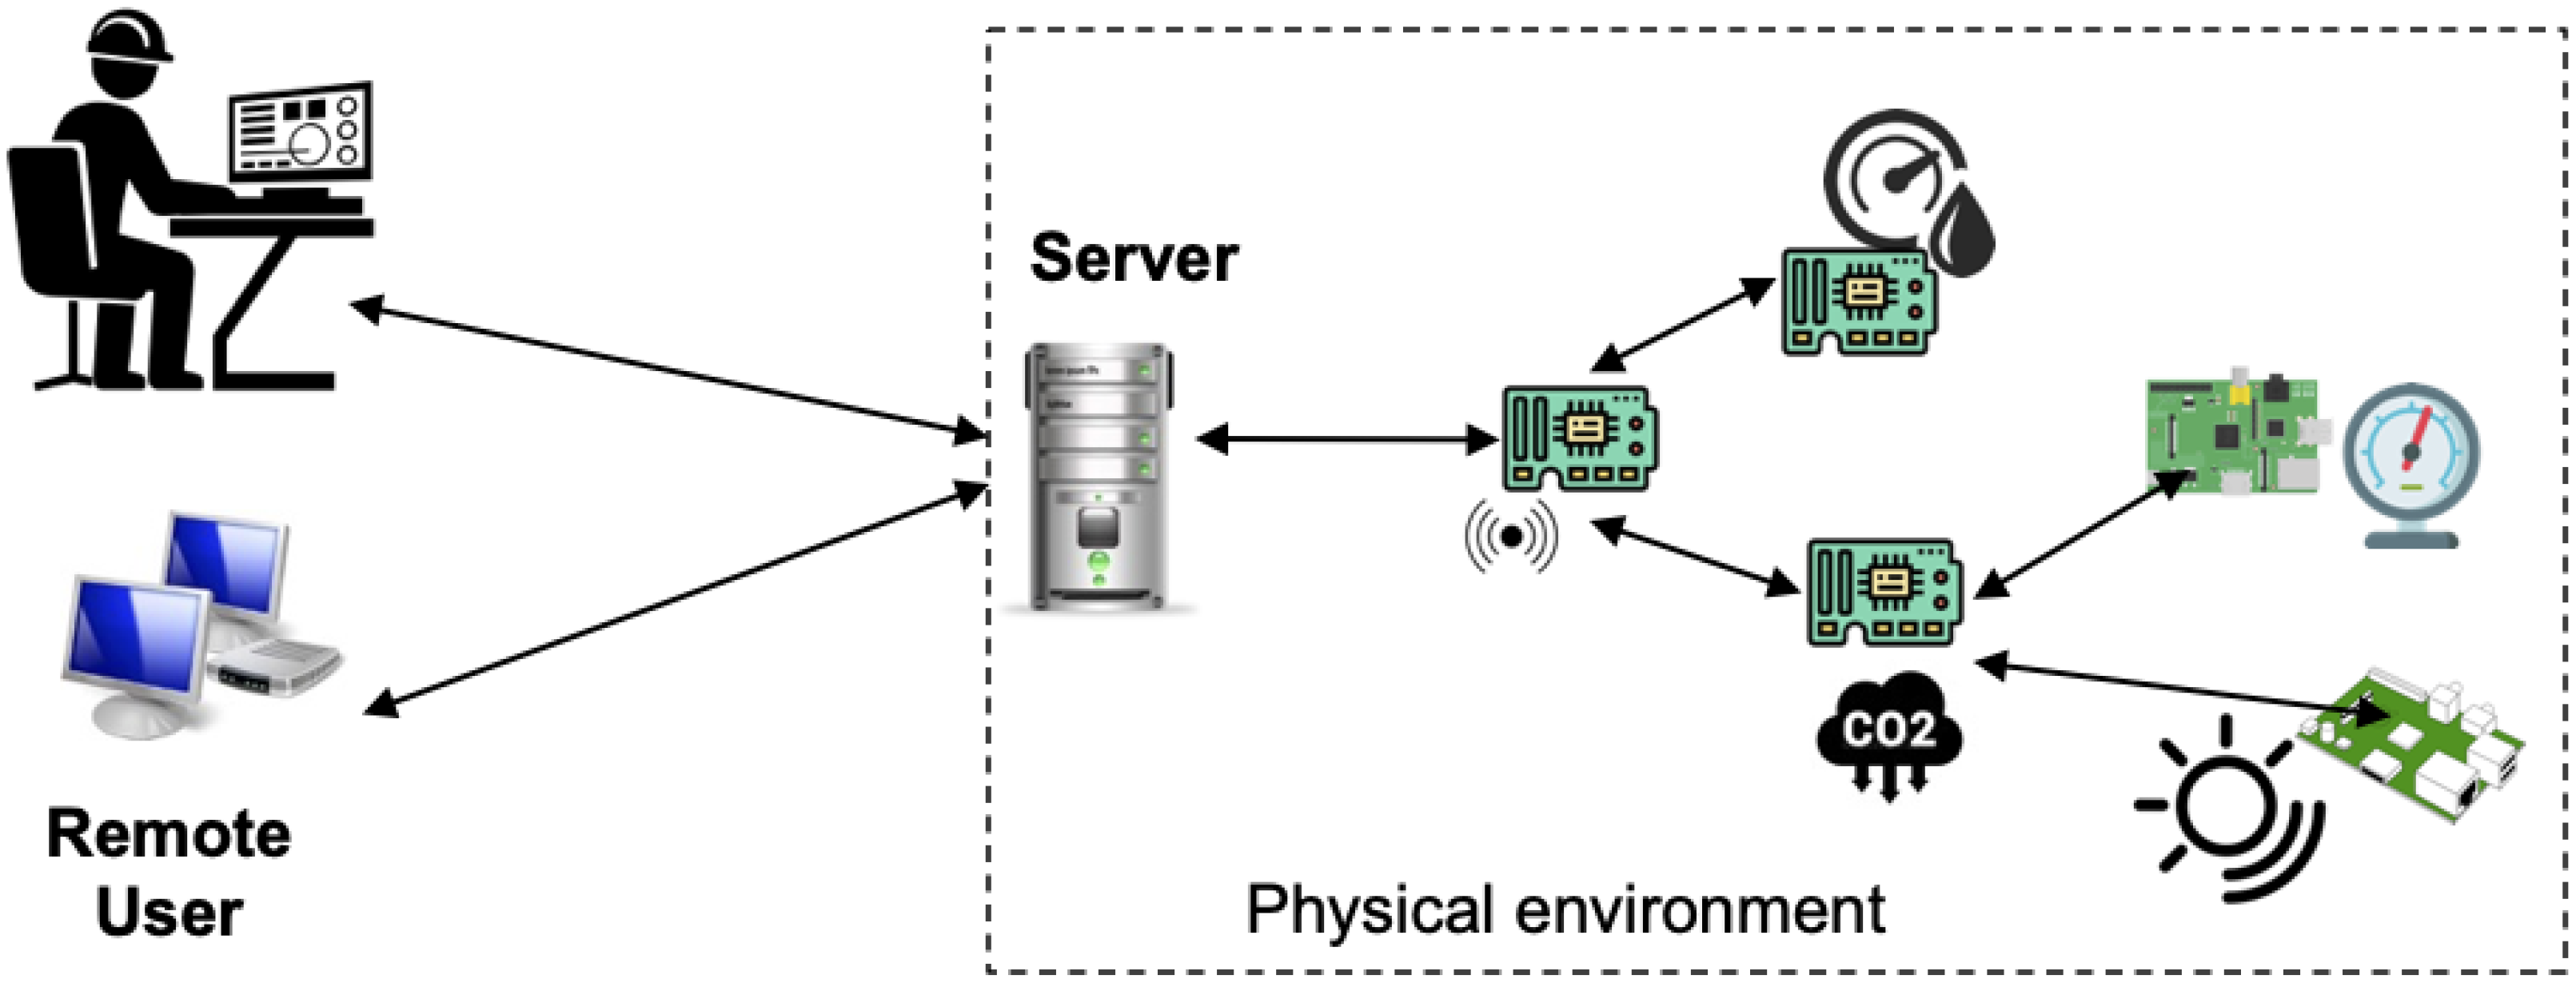 Sensors | Free Full-Text | Improving Security of Web Servers in Critical  IoT Systems through Self-Monitoring of Vulnerabilities